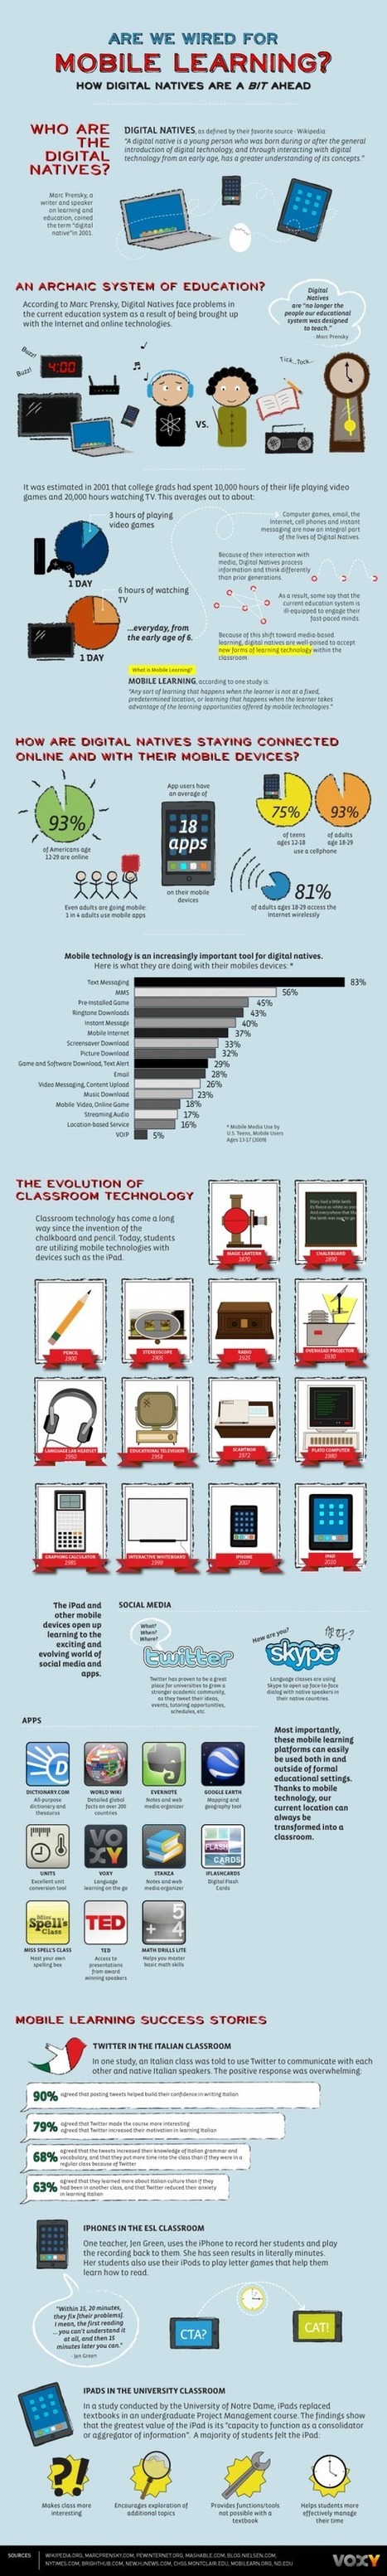 Is Mobile Learning in our DNA? [INFOGRAPHIC] | LearnDash | E-Learning-Inclusivo (Mashup) | Scoop.it